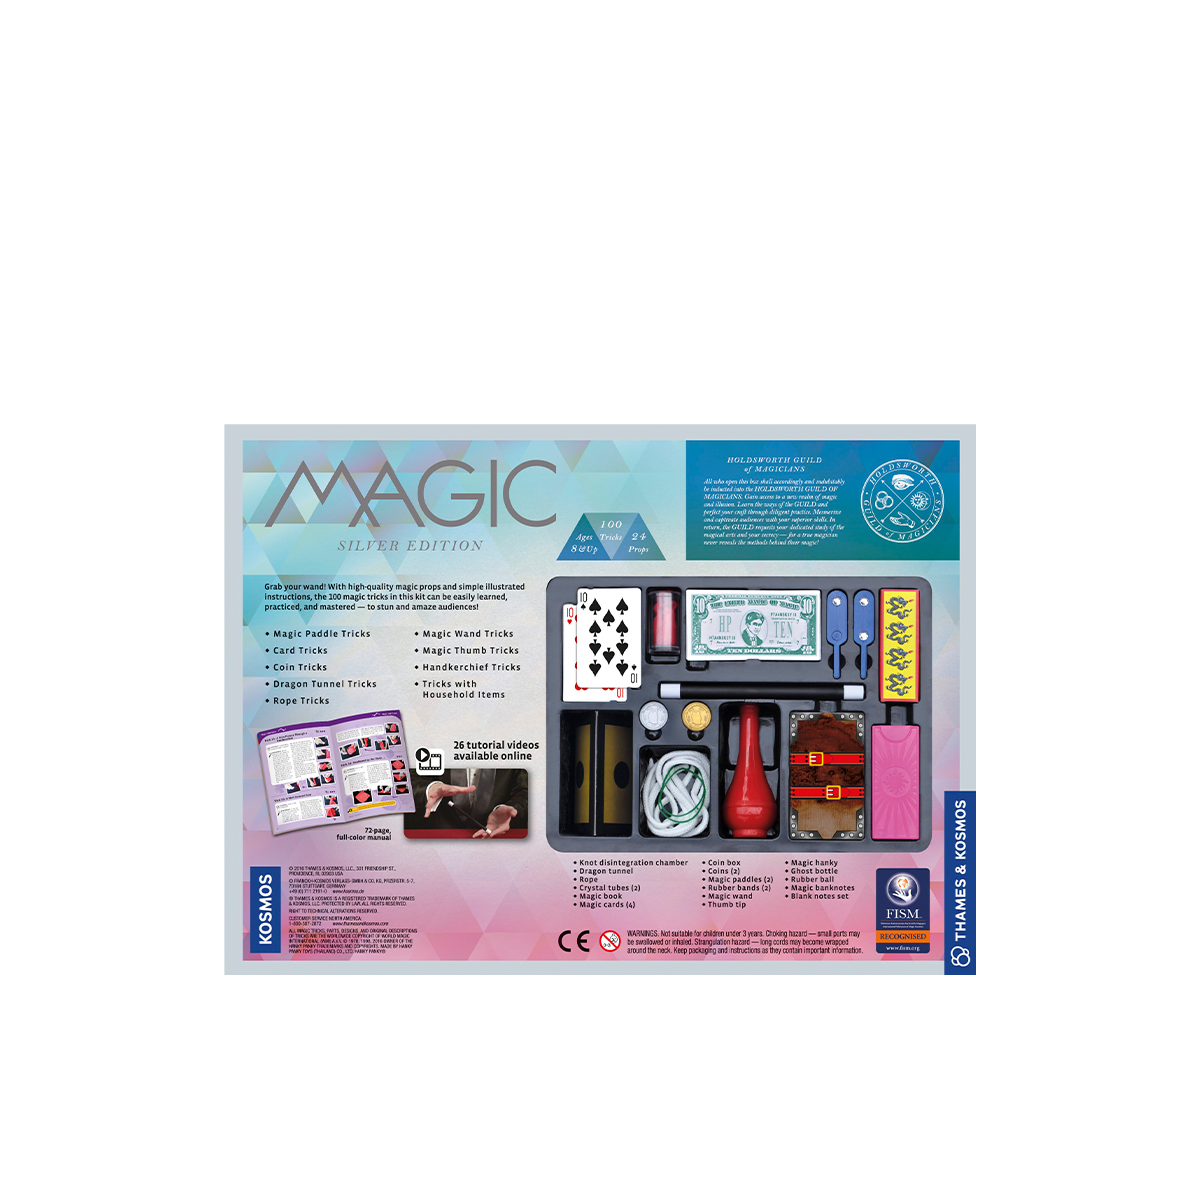 Thames & Kosmos-Magic: Silver Edition -  – Online shop of  Super chain stores